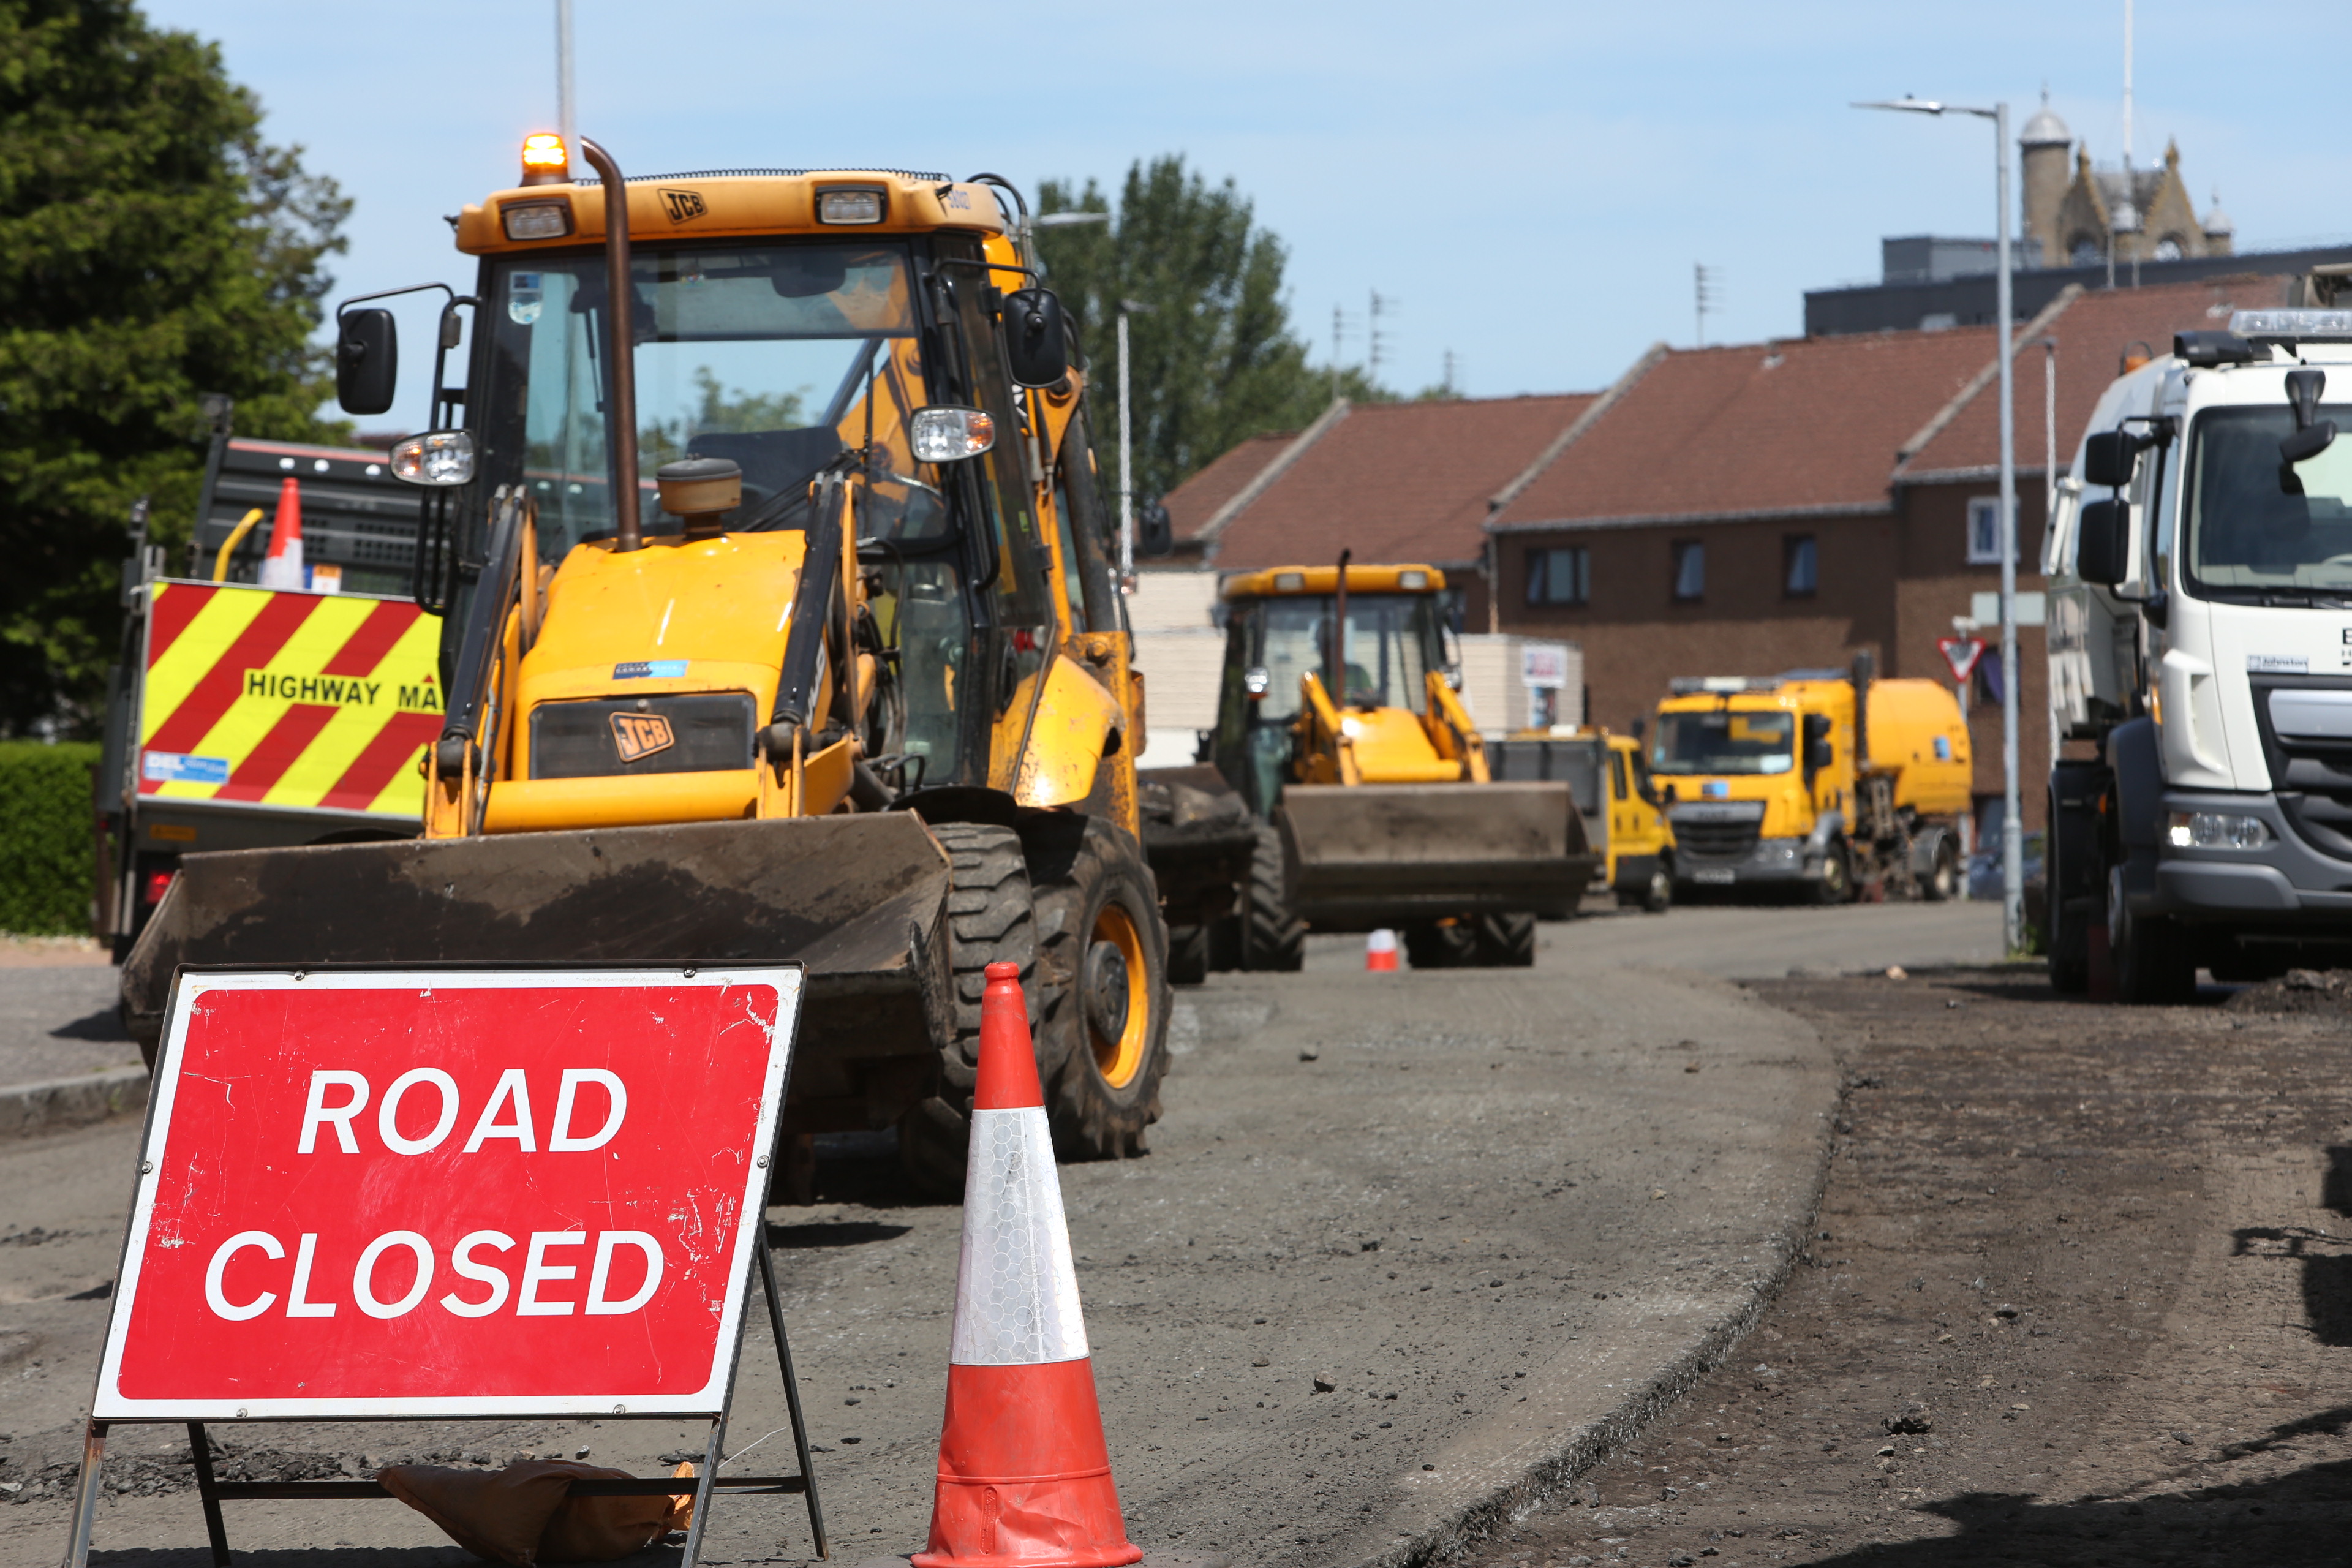 Concern over roads funding crisis